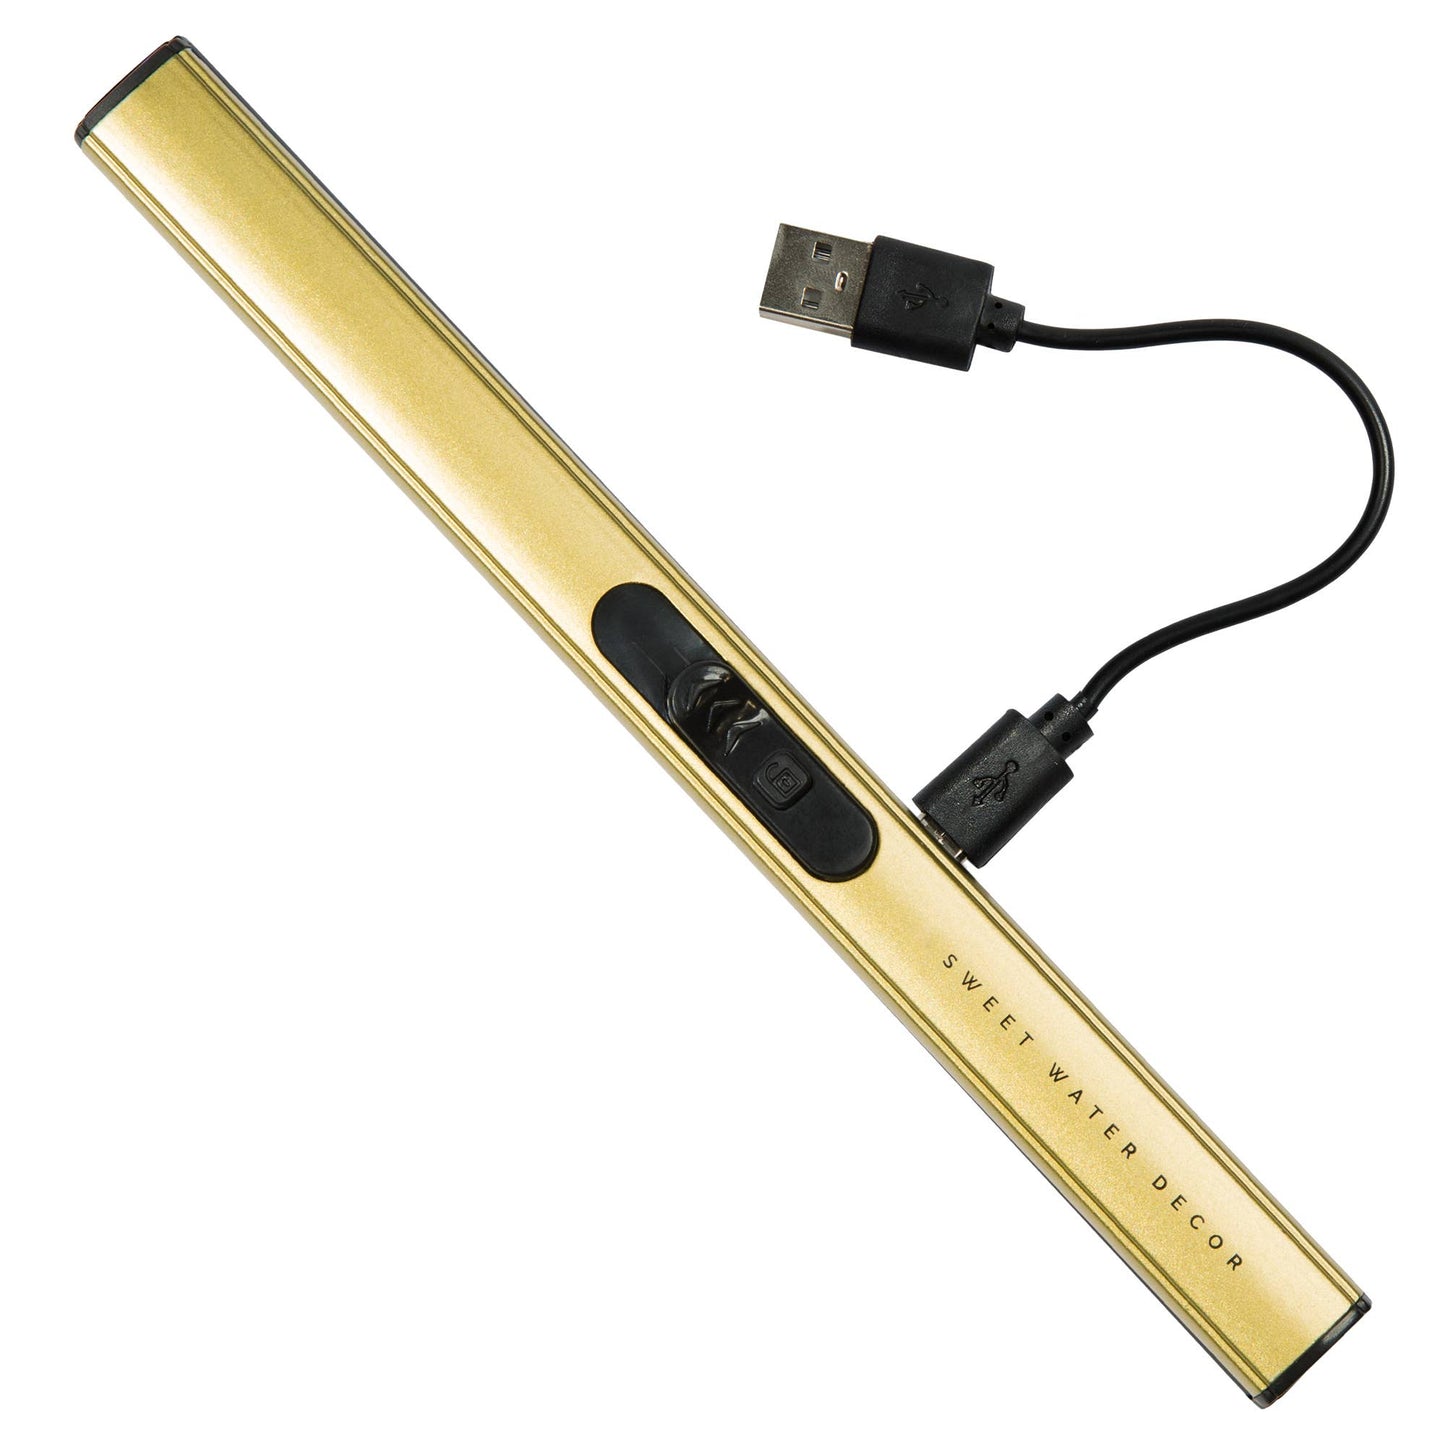 image shows an electronic candle lighter with a charger attached